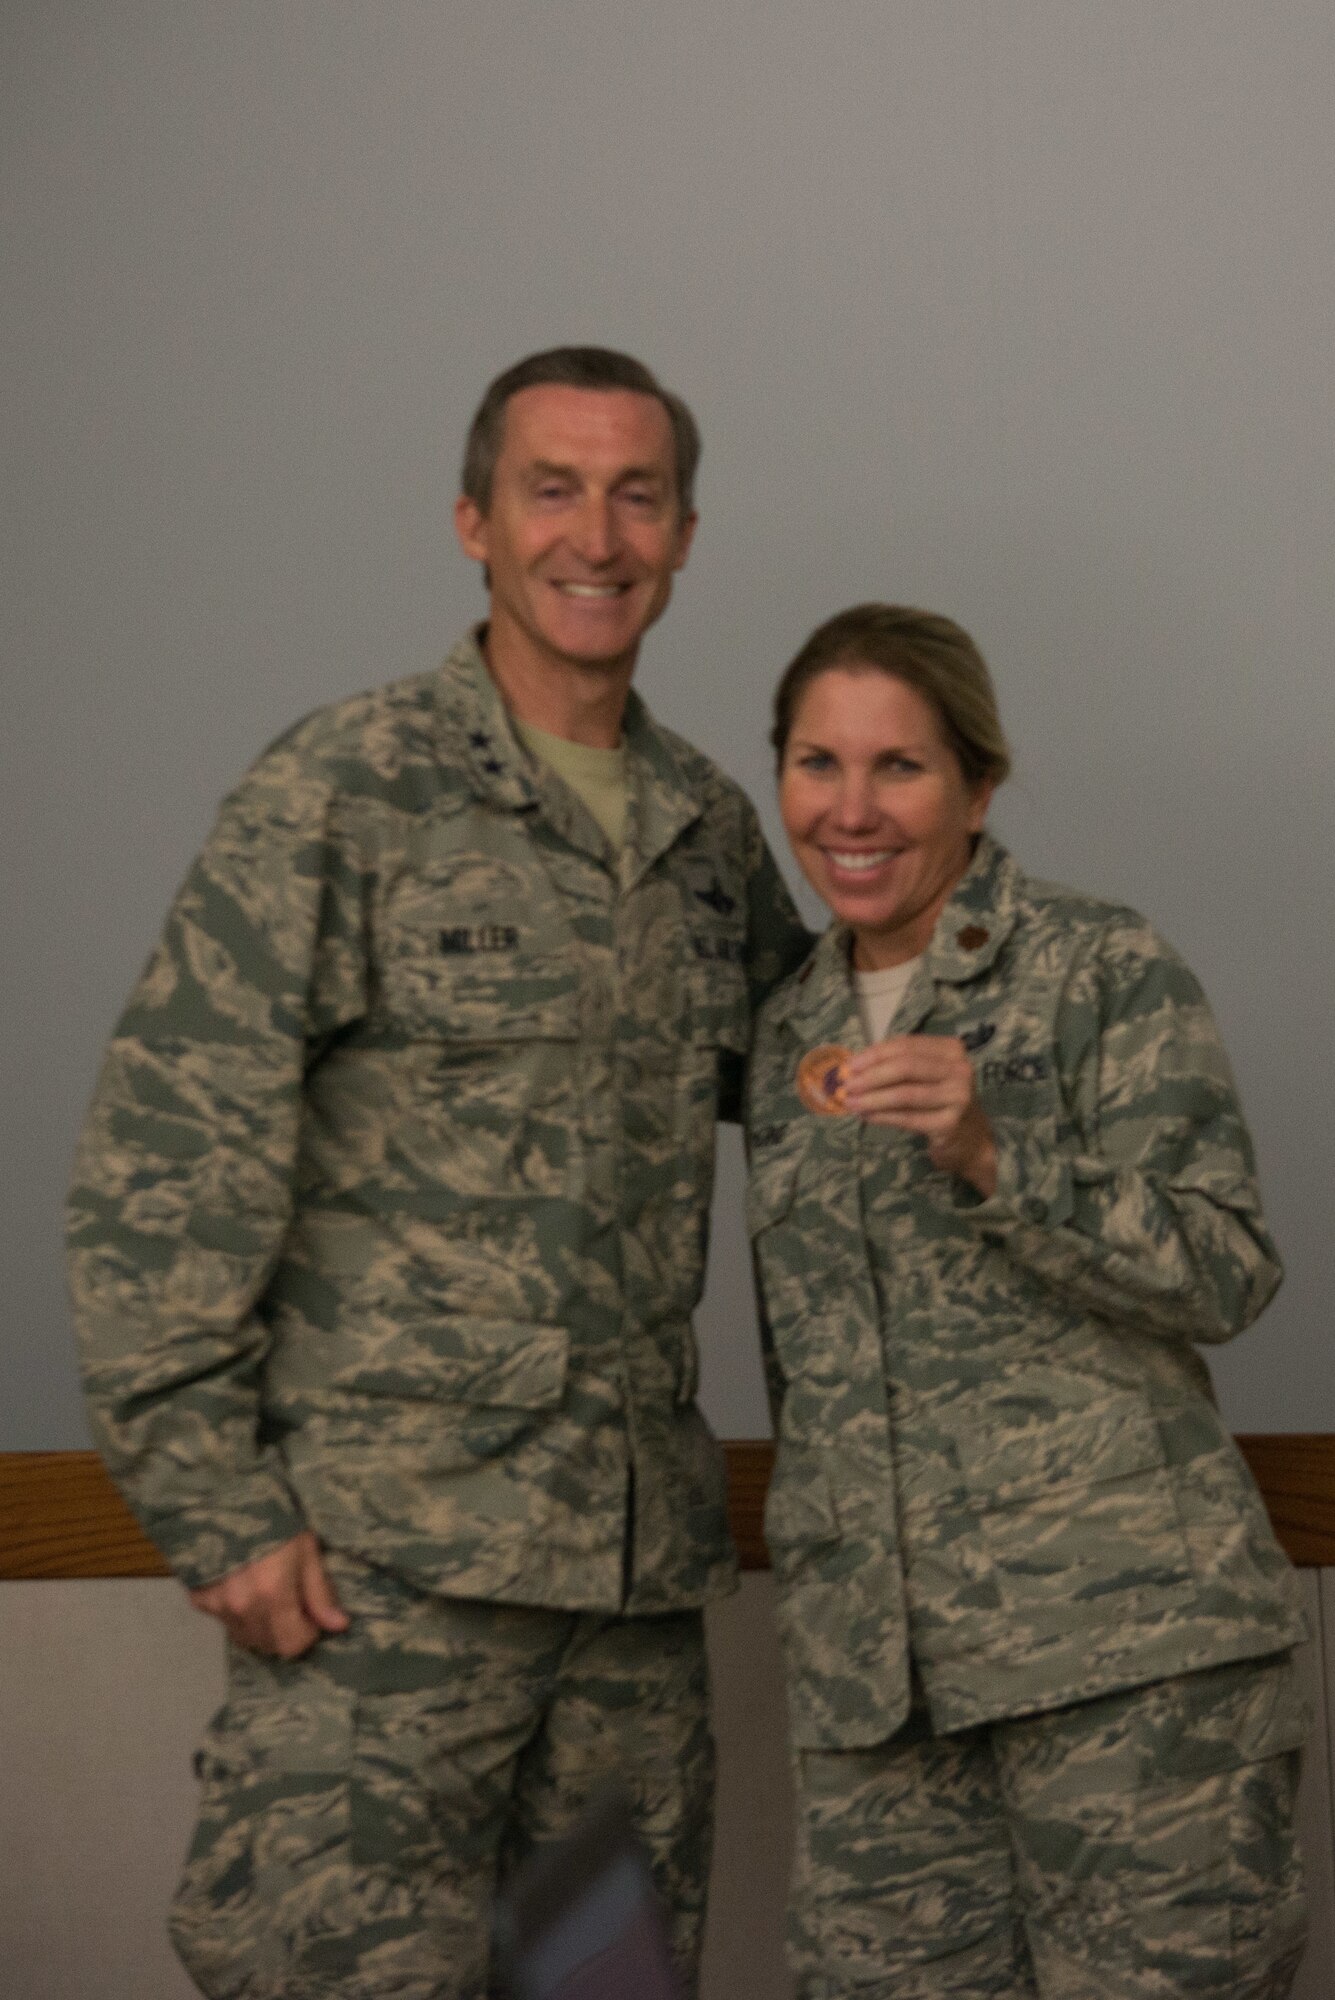 Maj. Shari Lemoine, 482nd Fighter Wing Executive Officer, received a coin from Tenth Air Force Commander, Maj. Gen. Ronald B. “Bruce” Miller in recognition of her contribution to the conference.